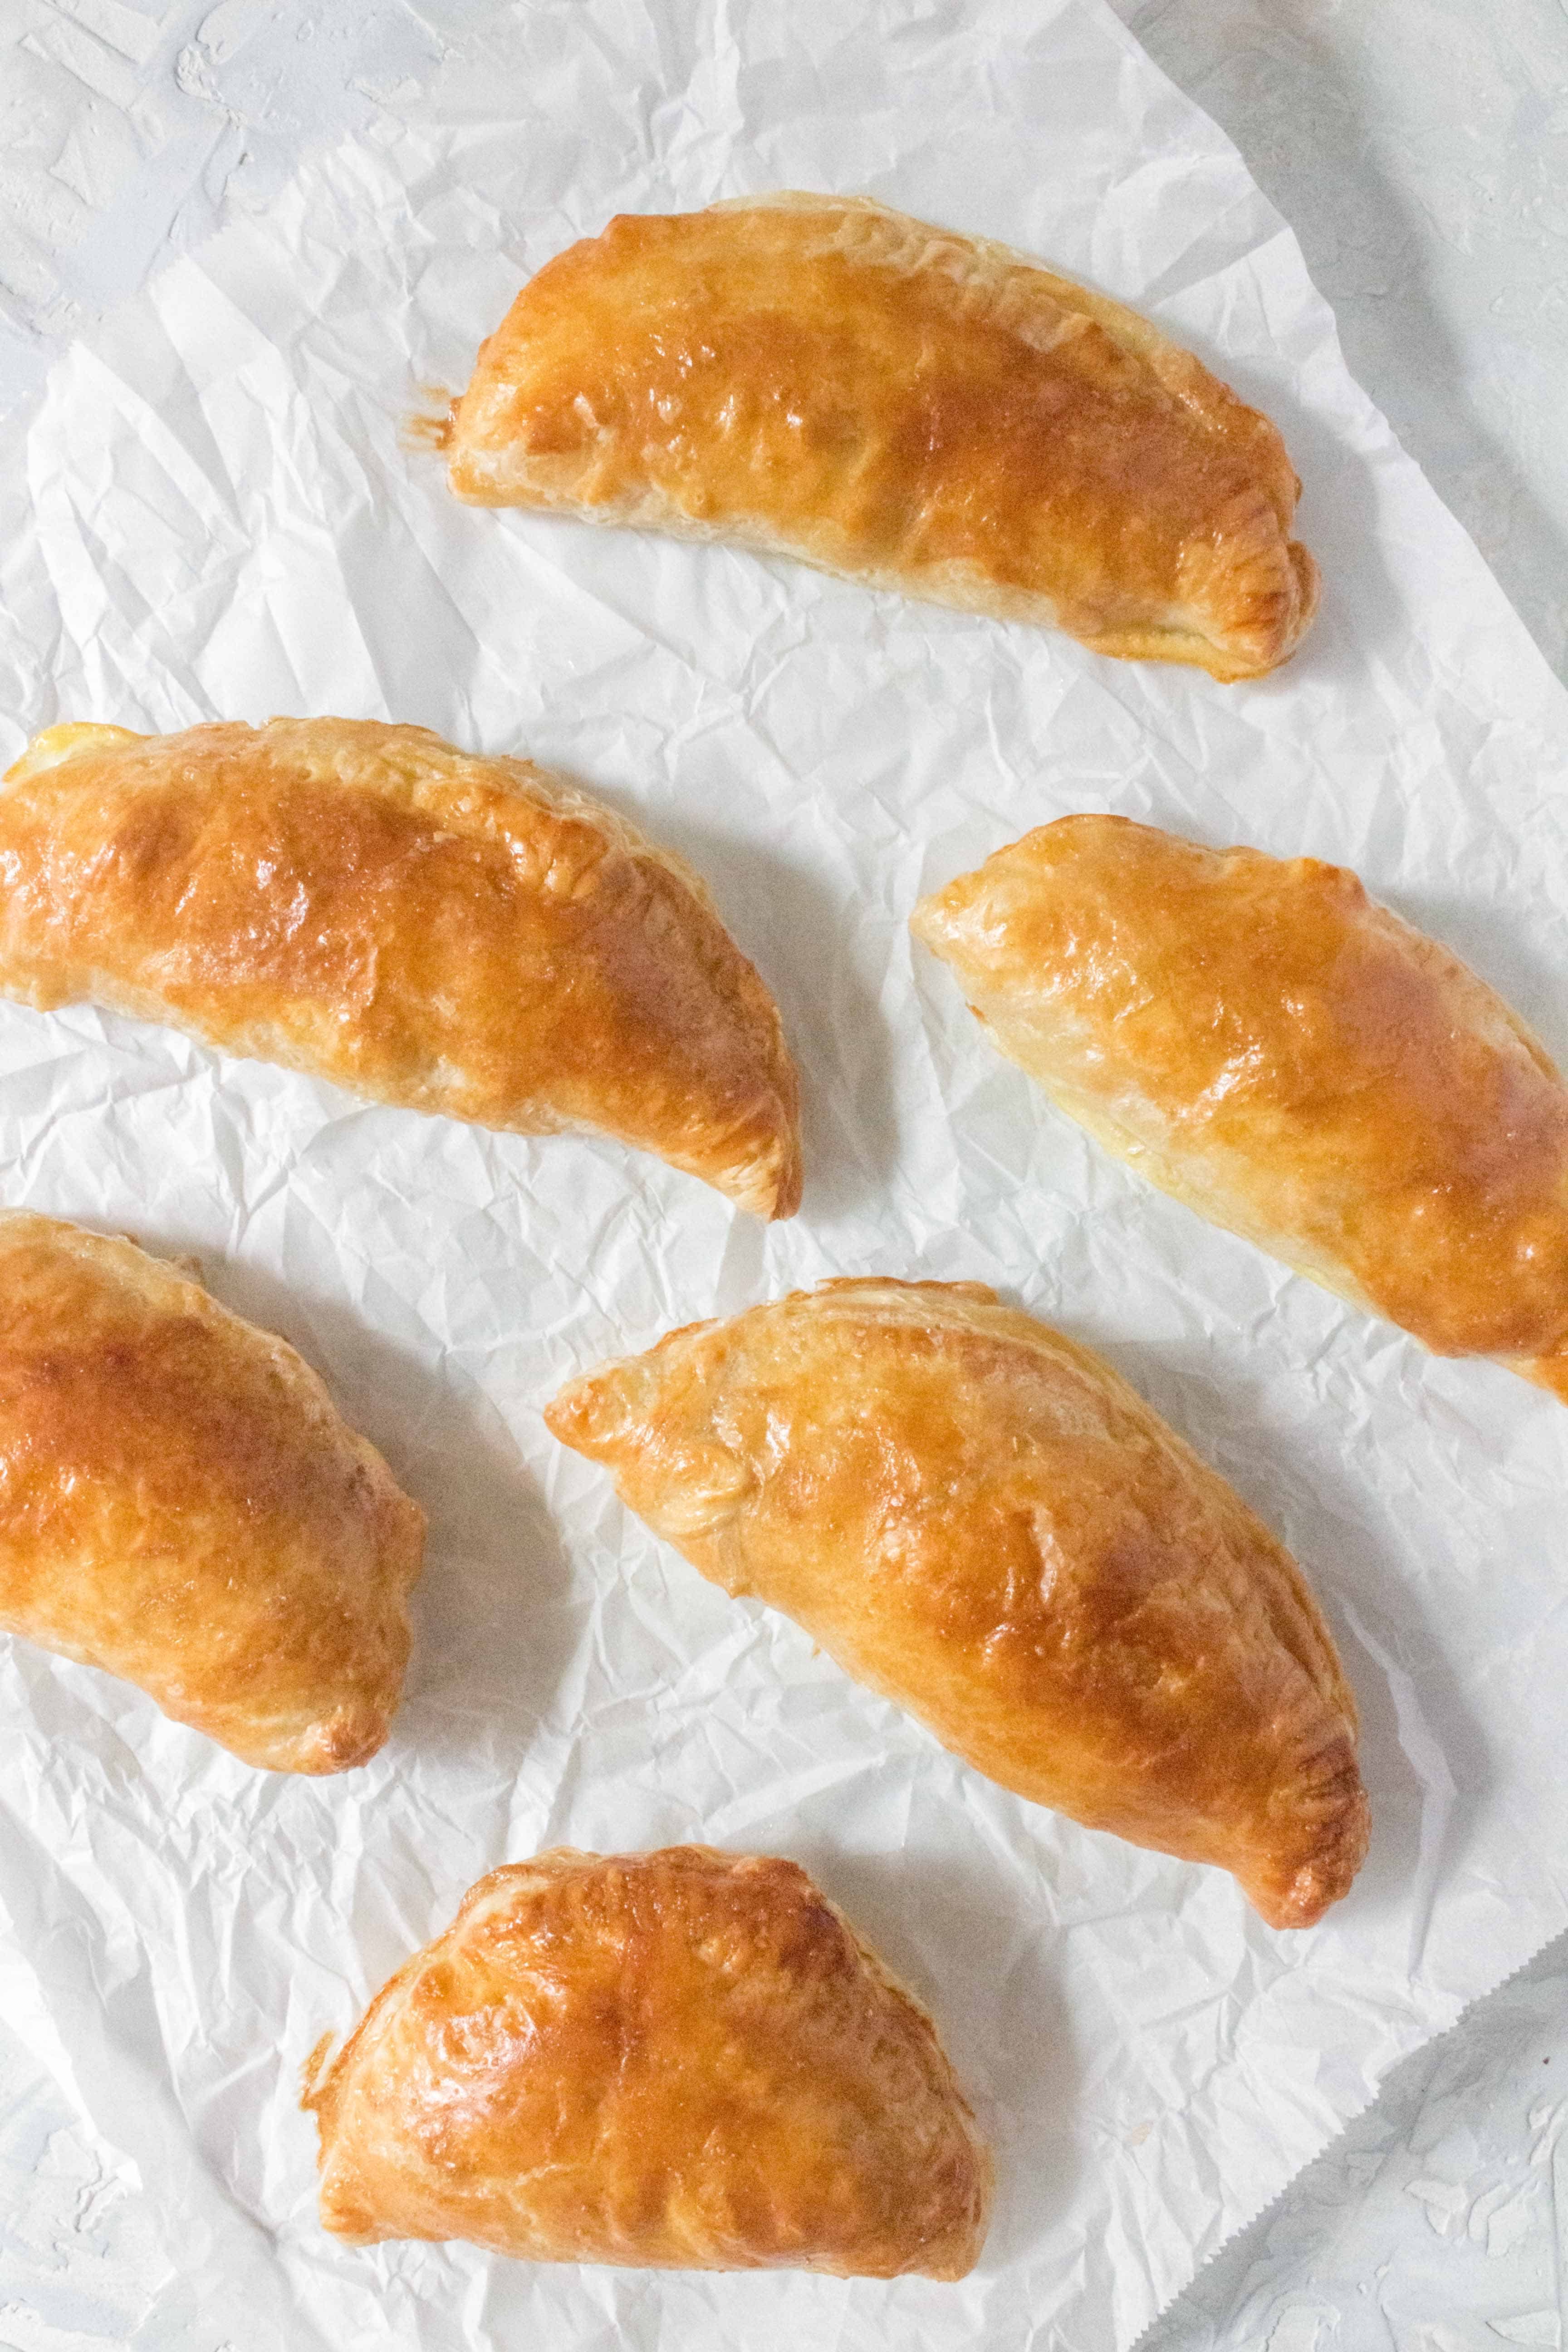 How To Use Leftover Turkey to Make Hand Pies